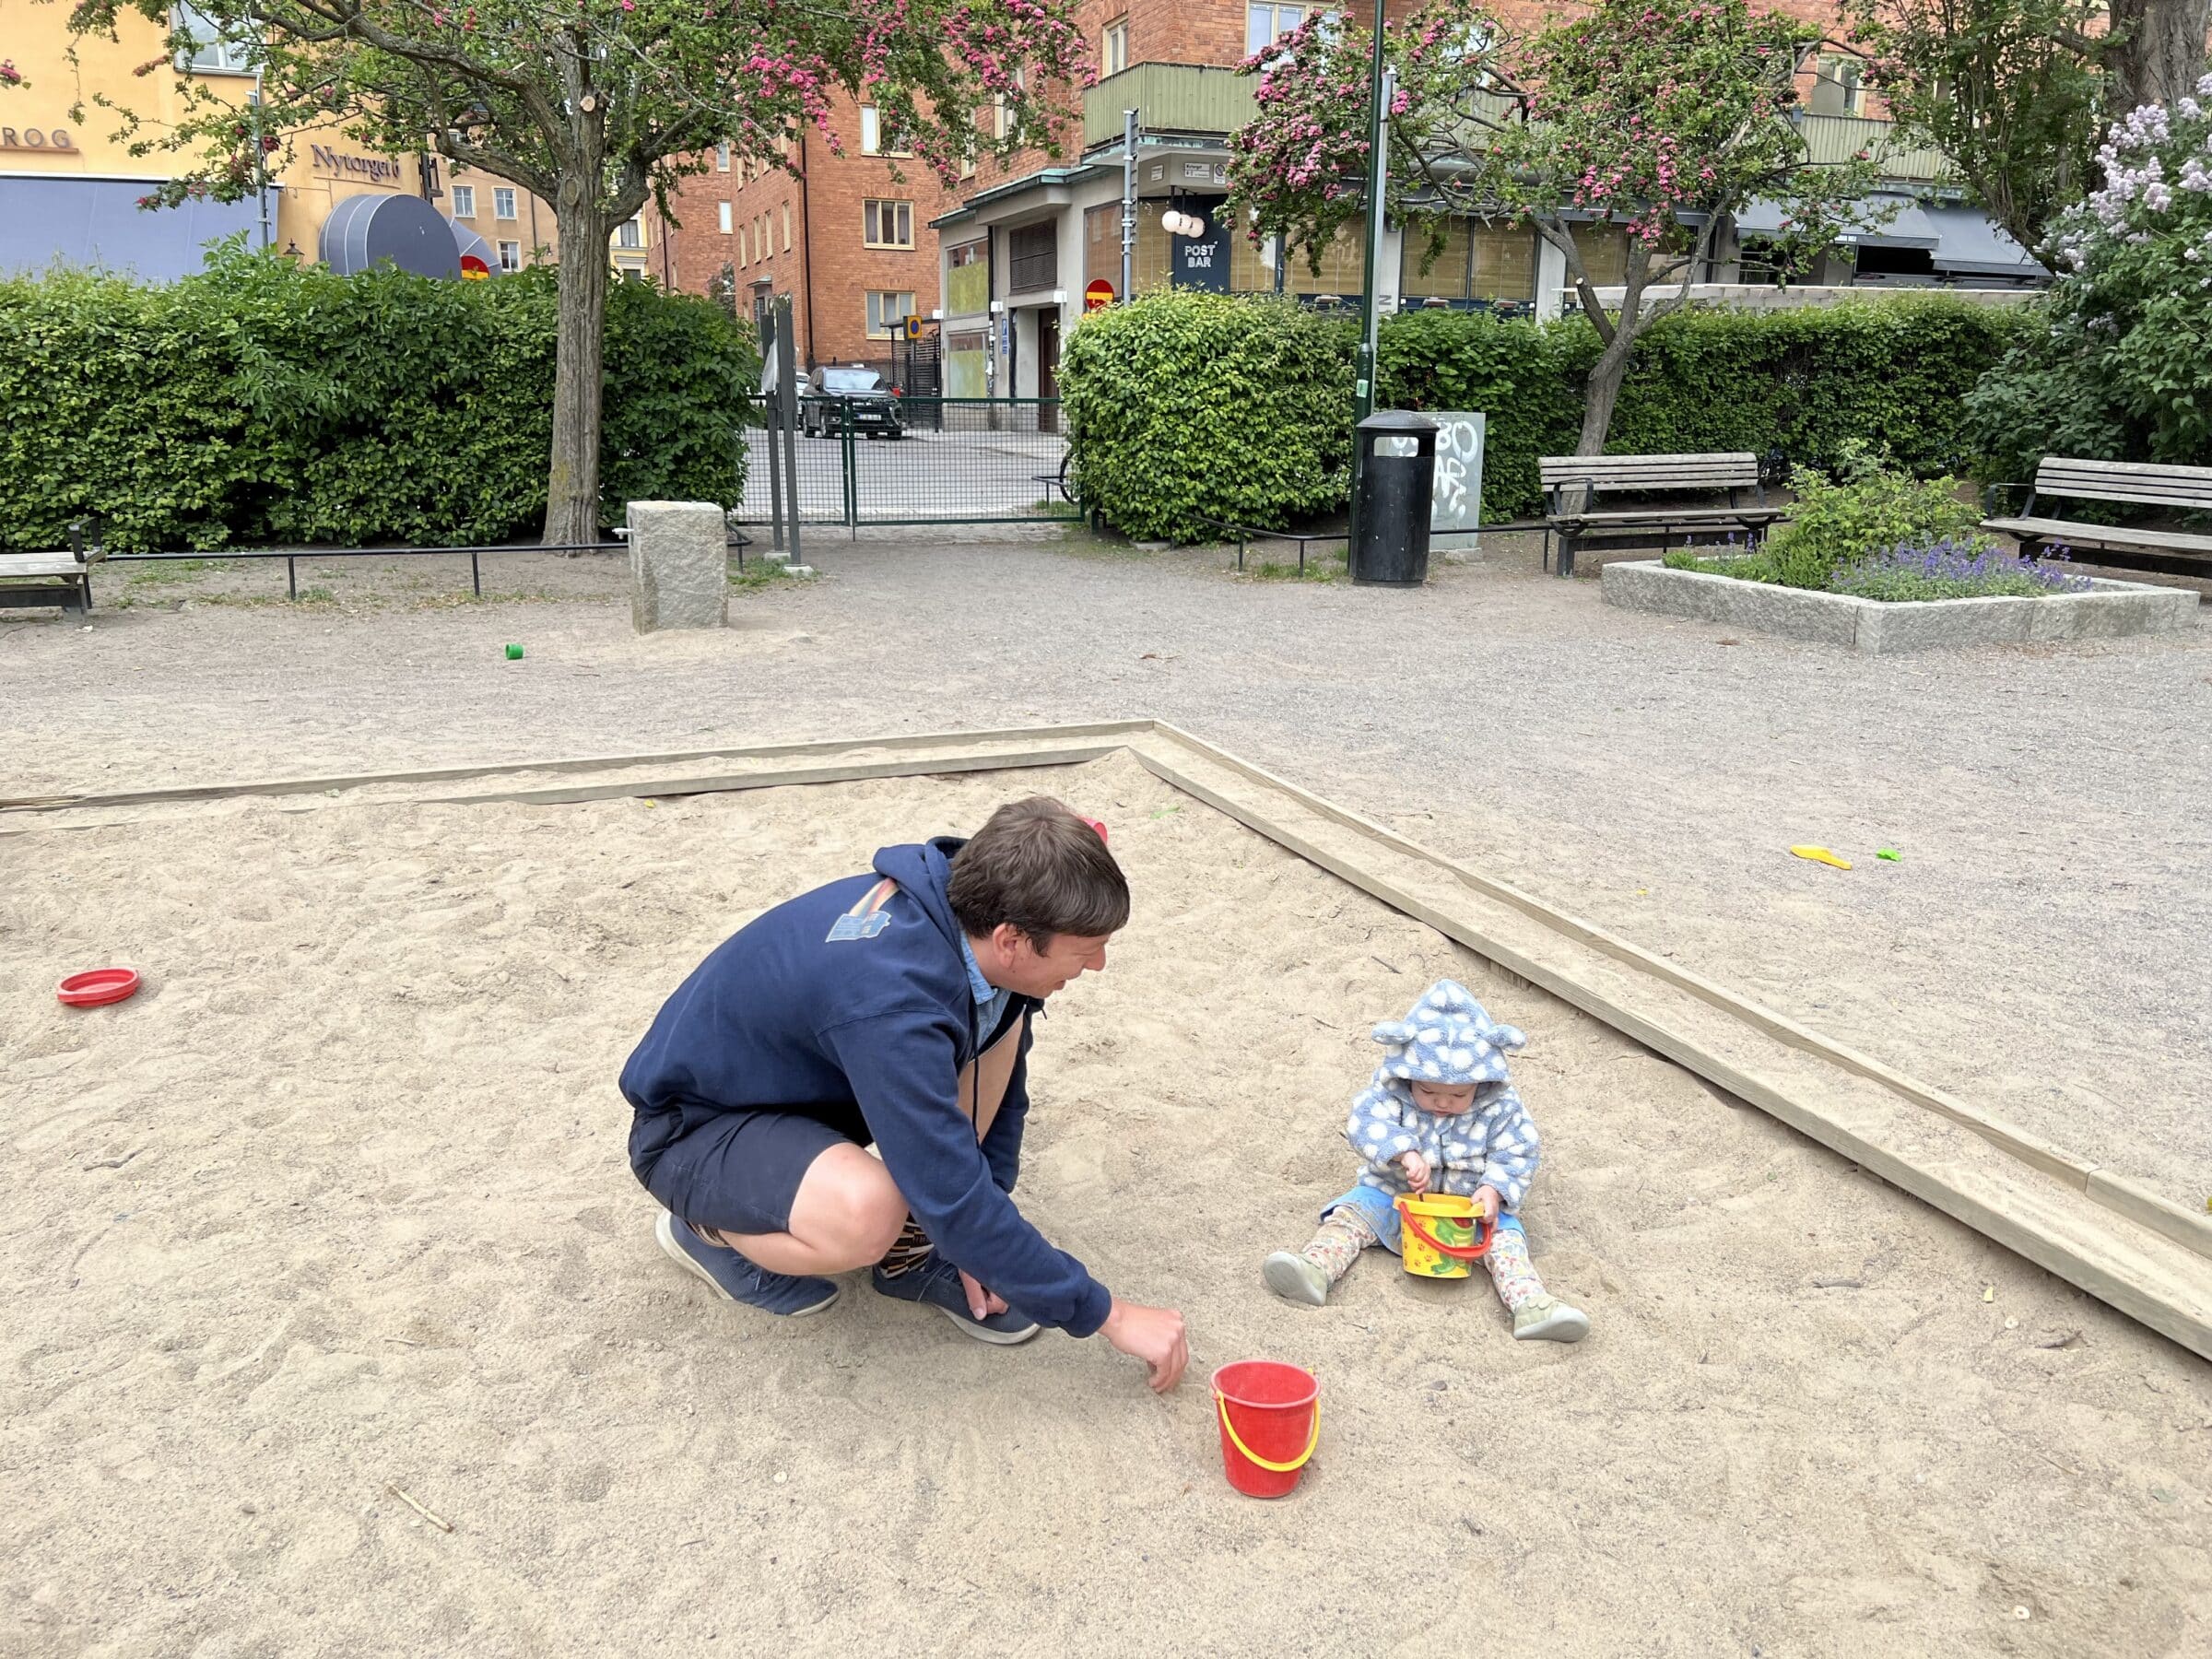 Playing in the sandpit outside our Airbnb